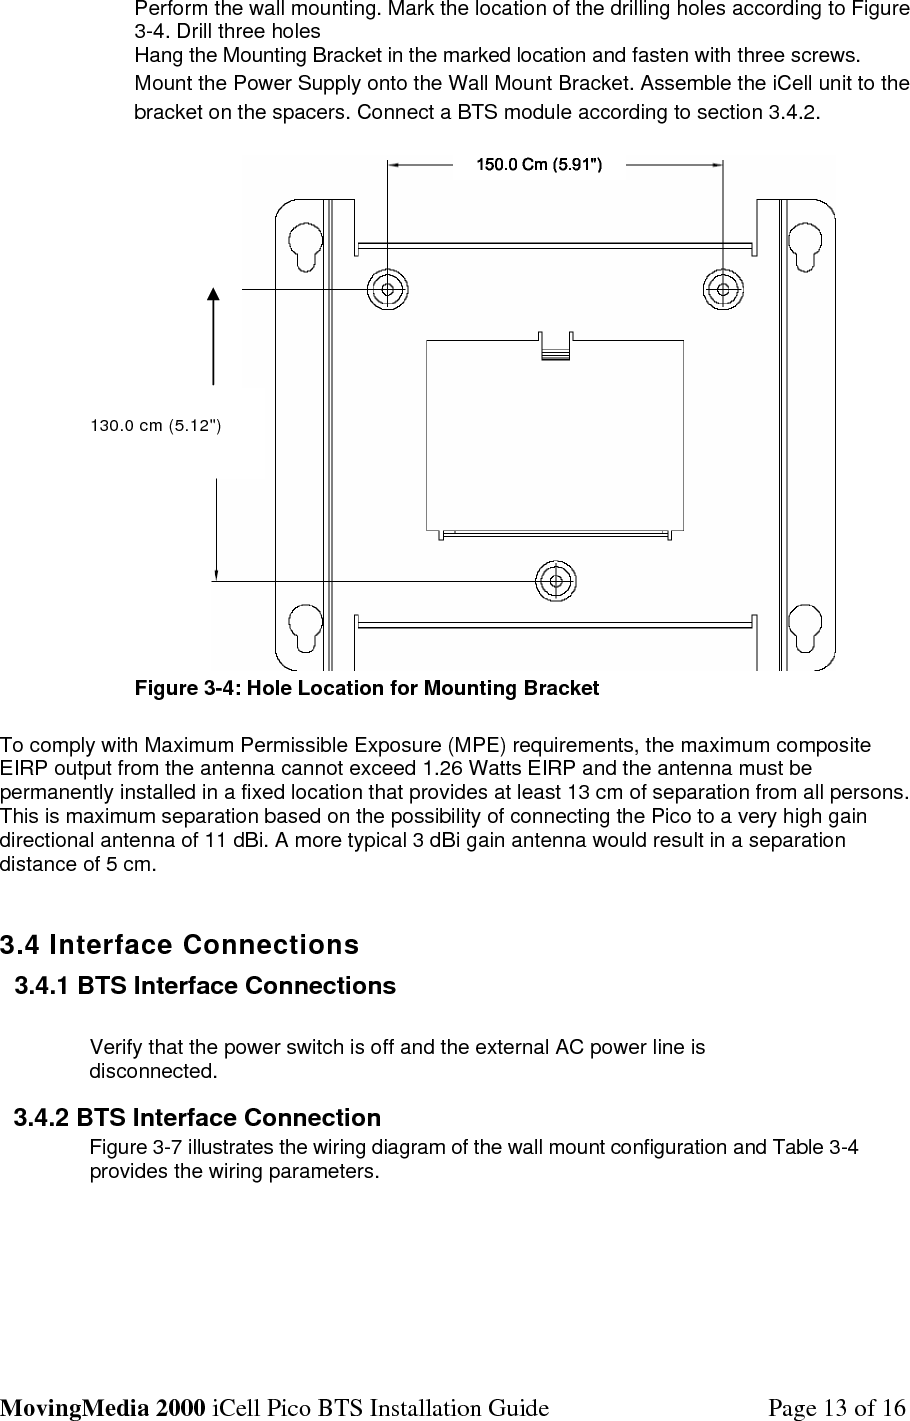 MovingMedia 2000 iCell Pico BTS Installation Guide         Page 14 of 16  